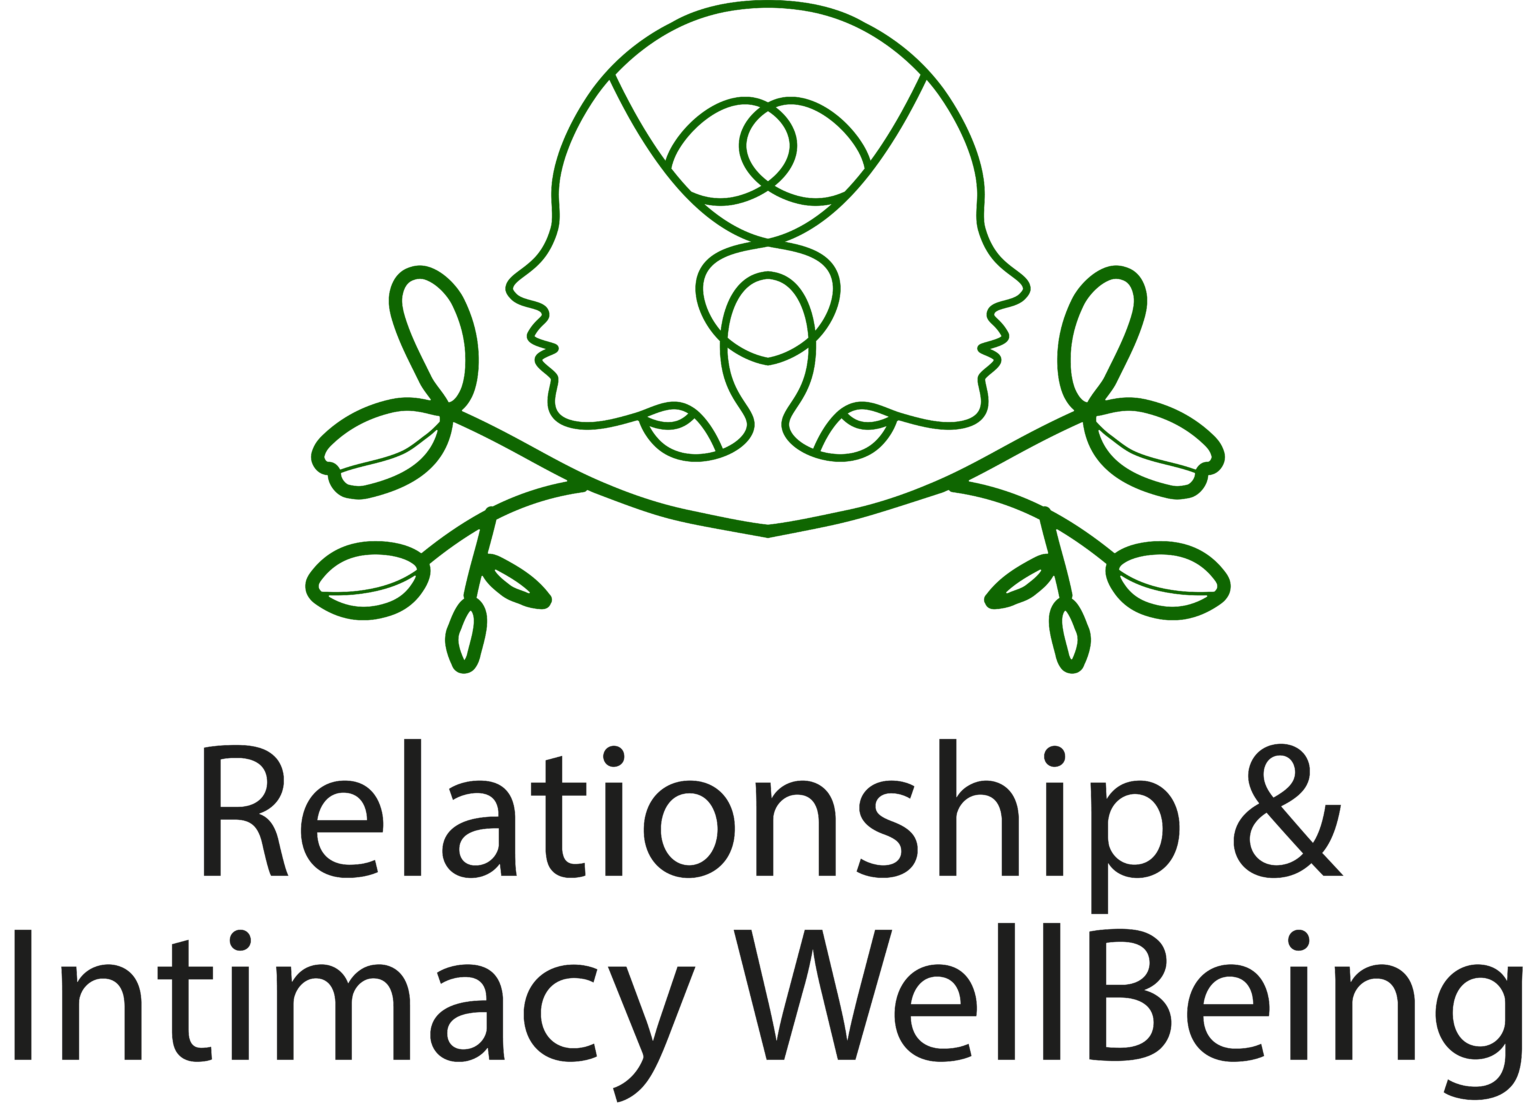 Center for Relationship & Intimacy Wellbeing West Los Angeles